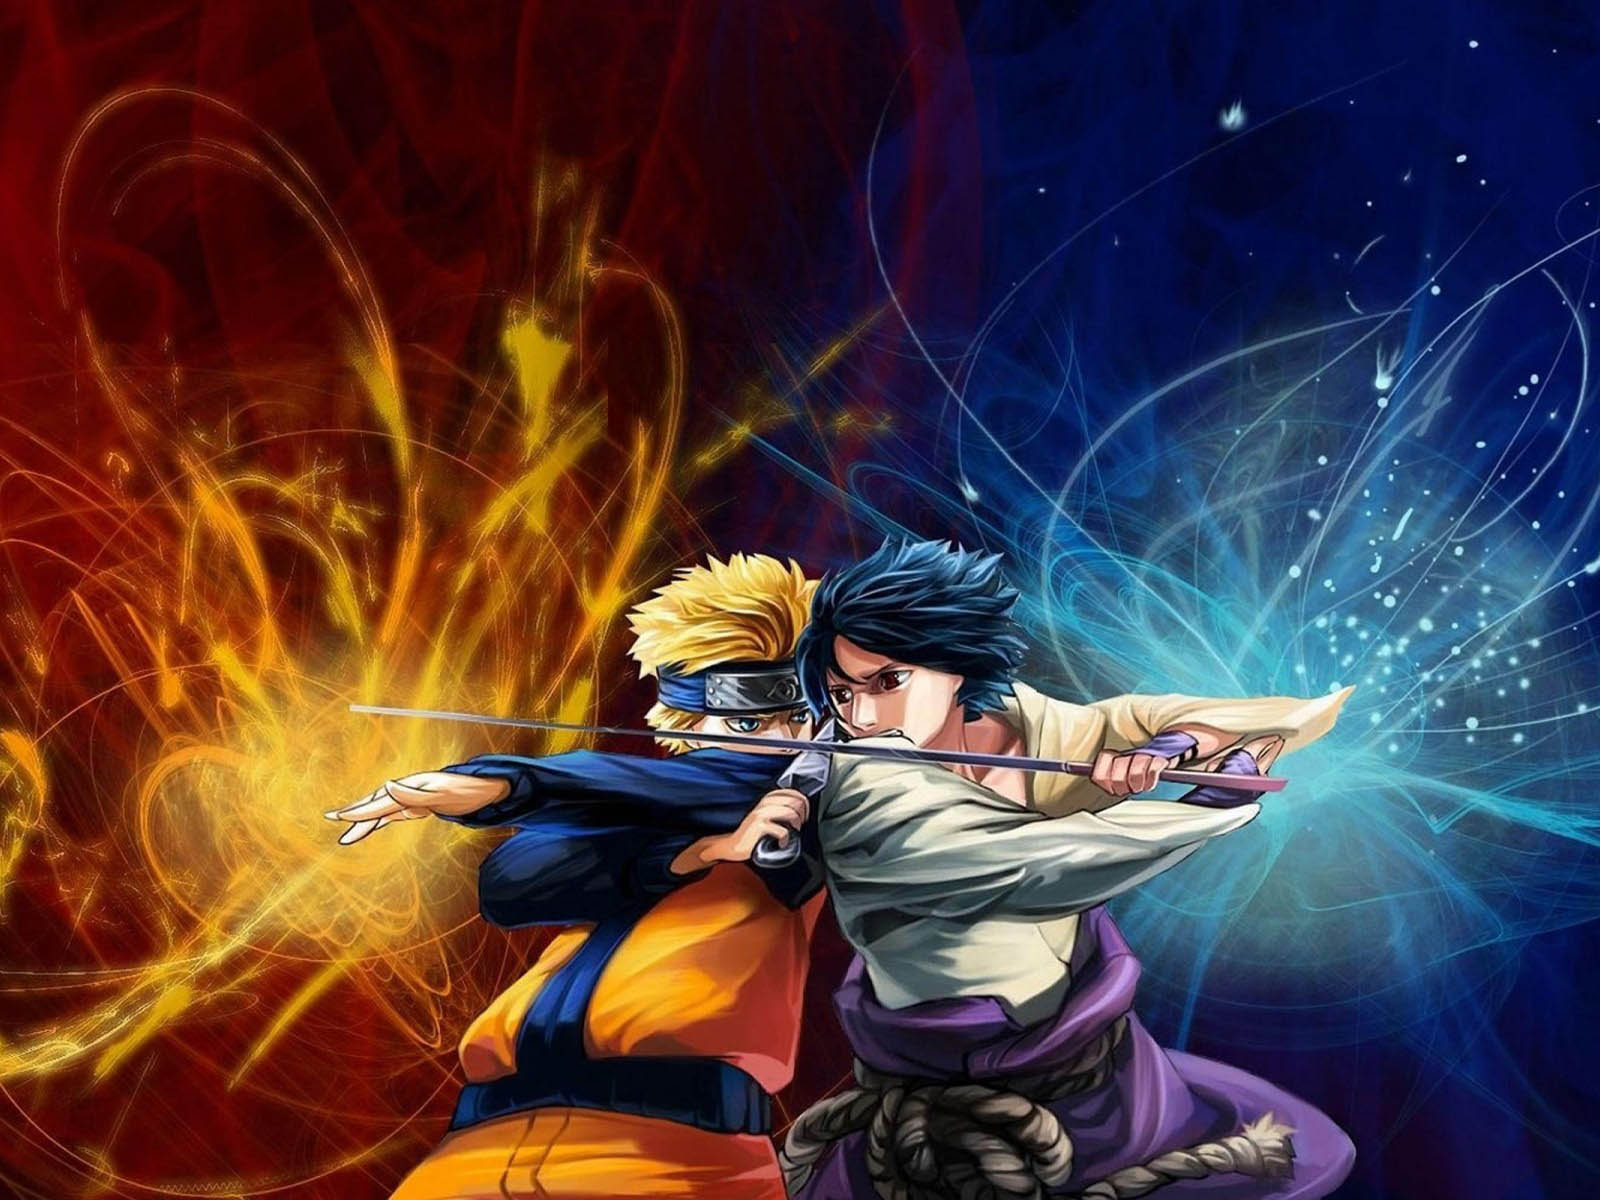 Naruto Shippuden Wallpapers - Funny Photos | Funny mages ...
